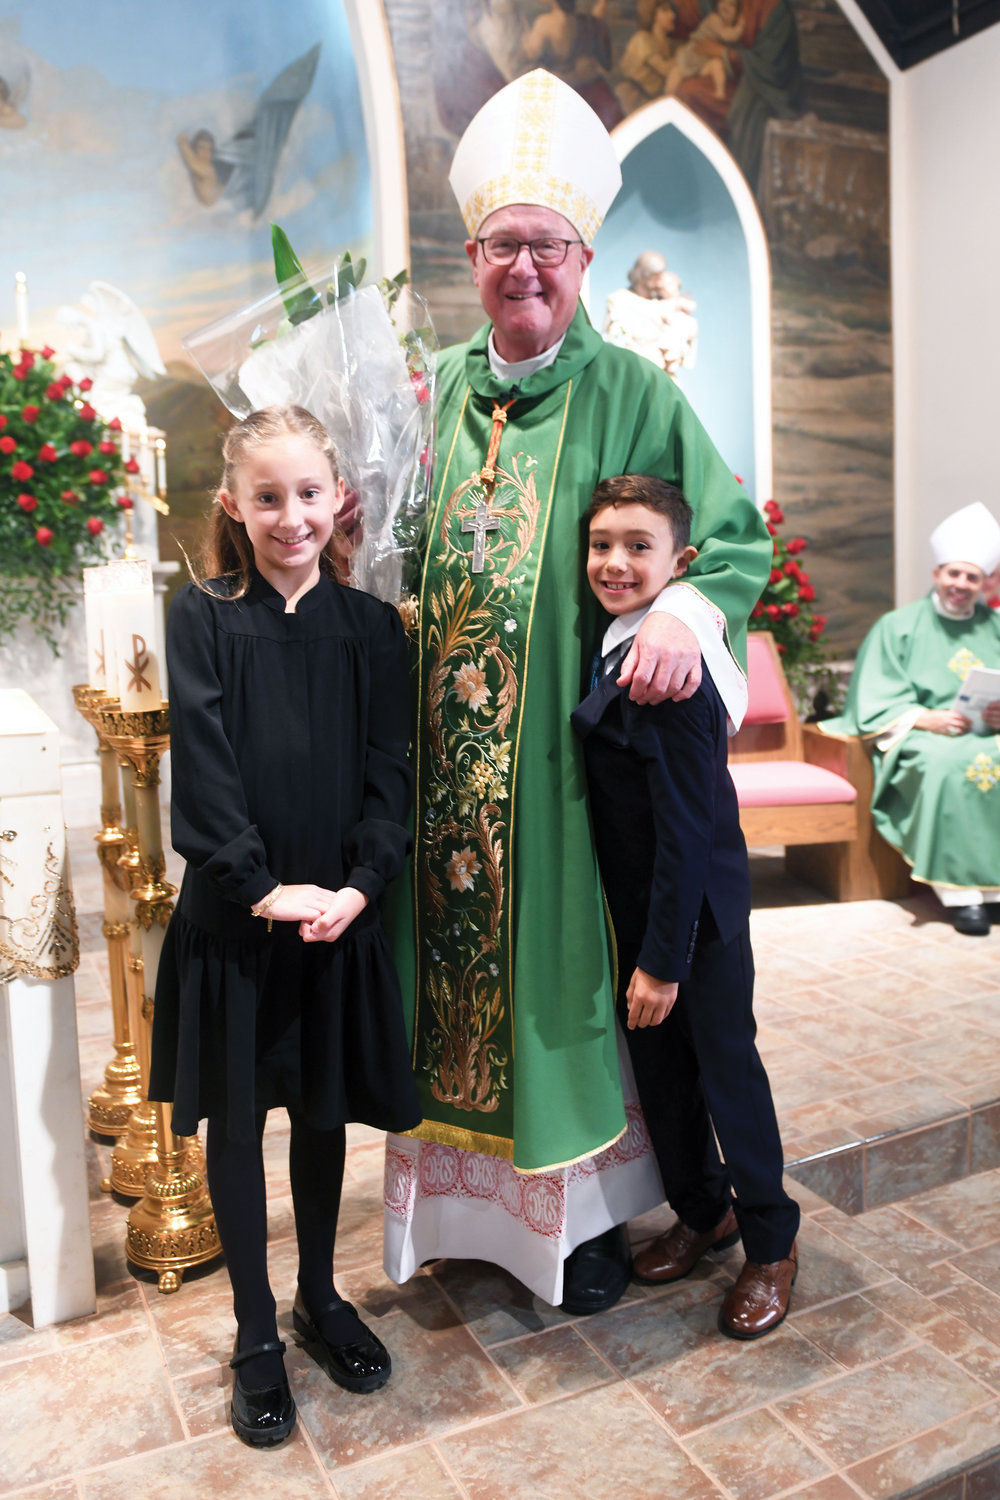 Katherine Campbell and Samuel Caxon from the Sacred Heart-Our Lady of Pompeii religious education program present flowers to Cardinal Dolan at Our Lady of Pompeii Church Oct. 1.